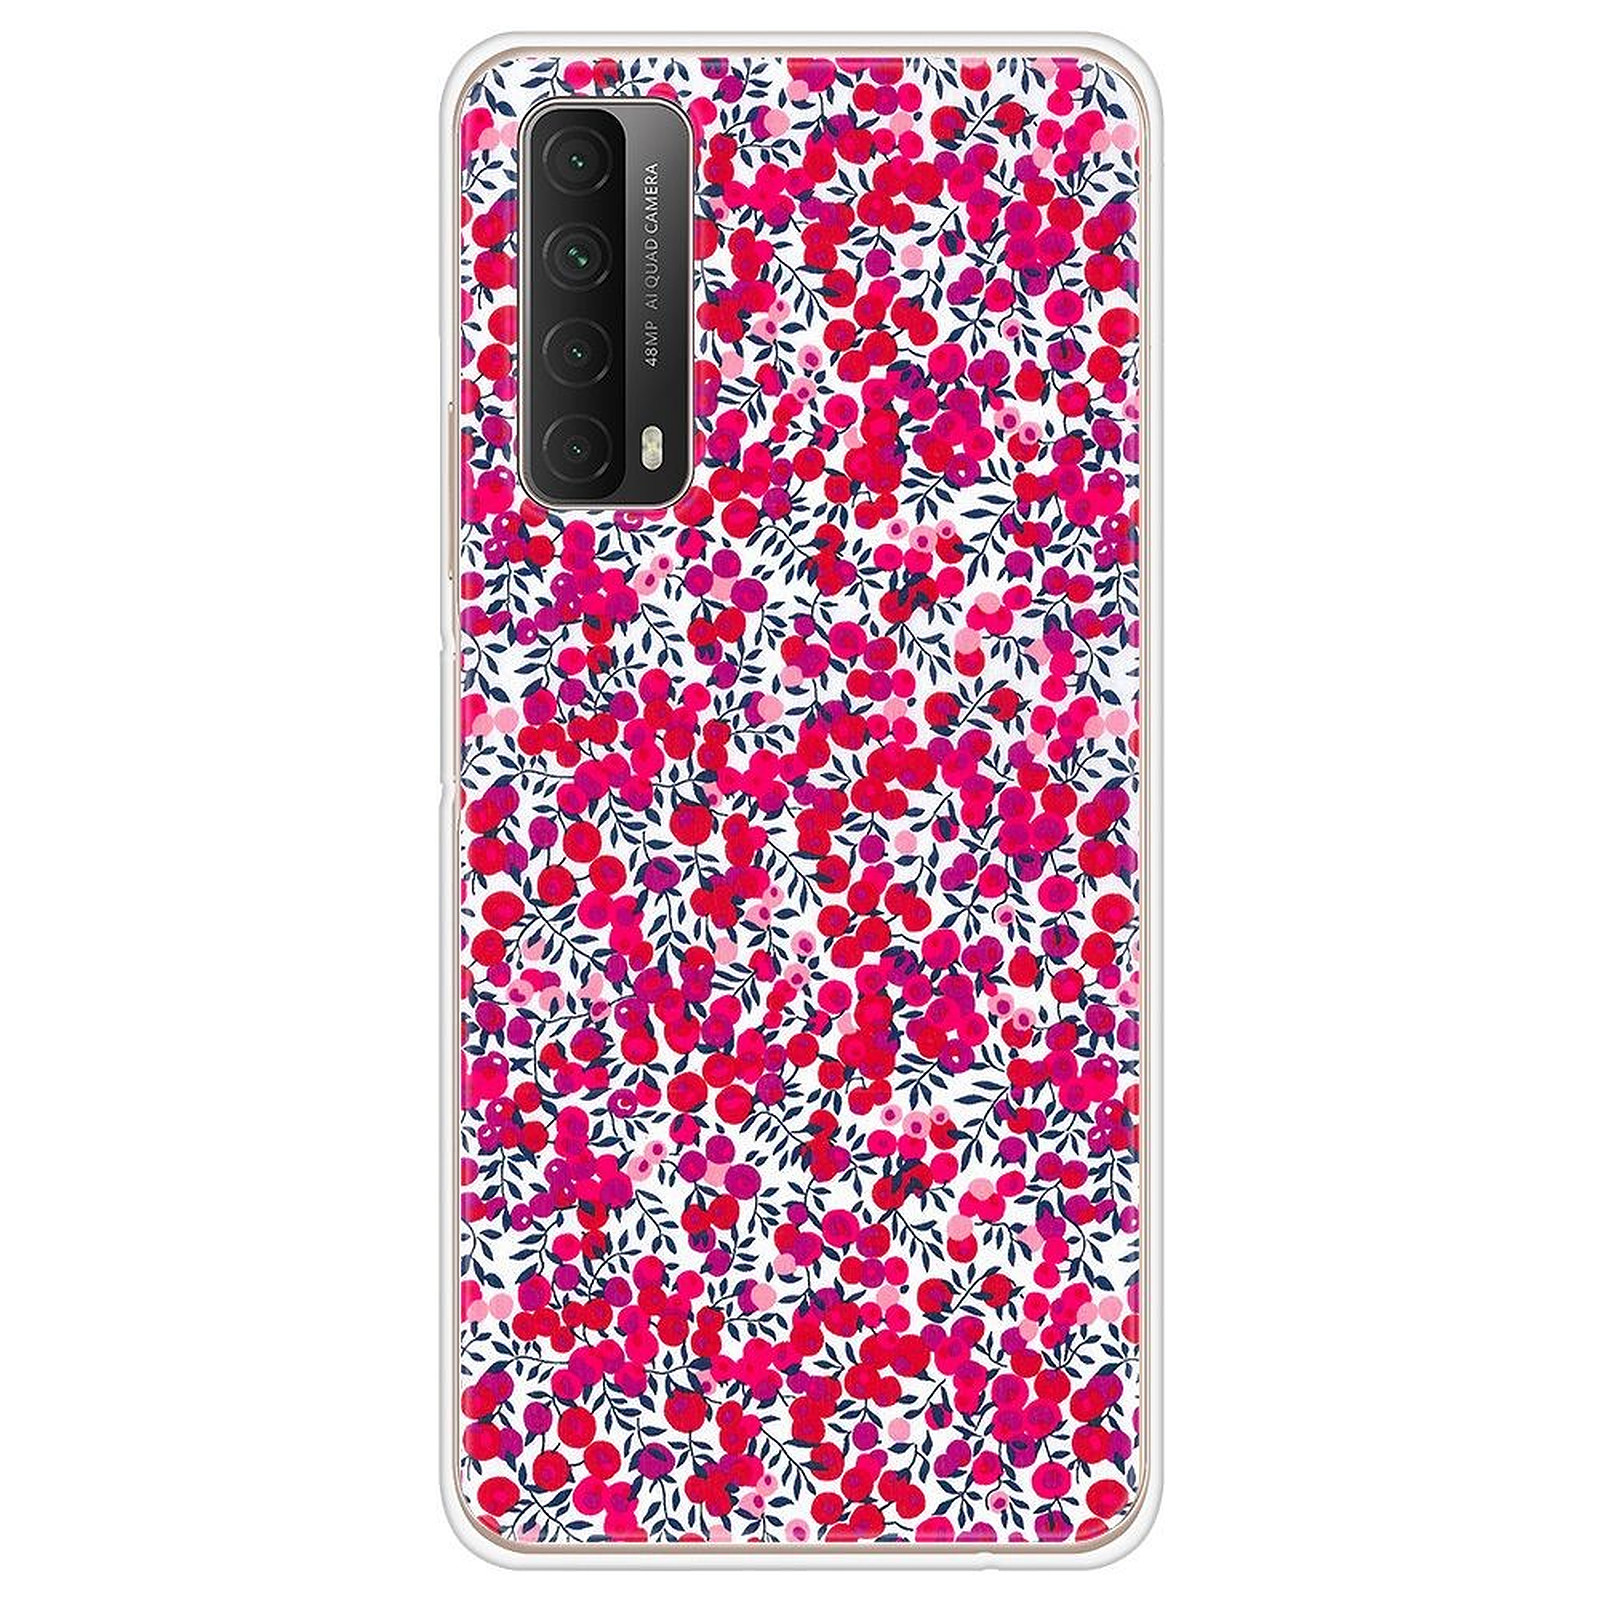 1001 Coques Coque silicone gel Huawei P Smart 2021 motif Liberty Wiltshire Rouge - Coque telephone 1001Coques